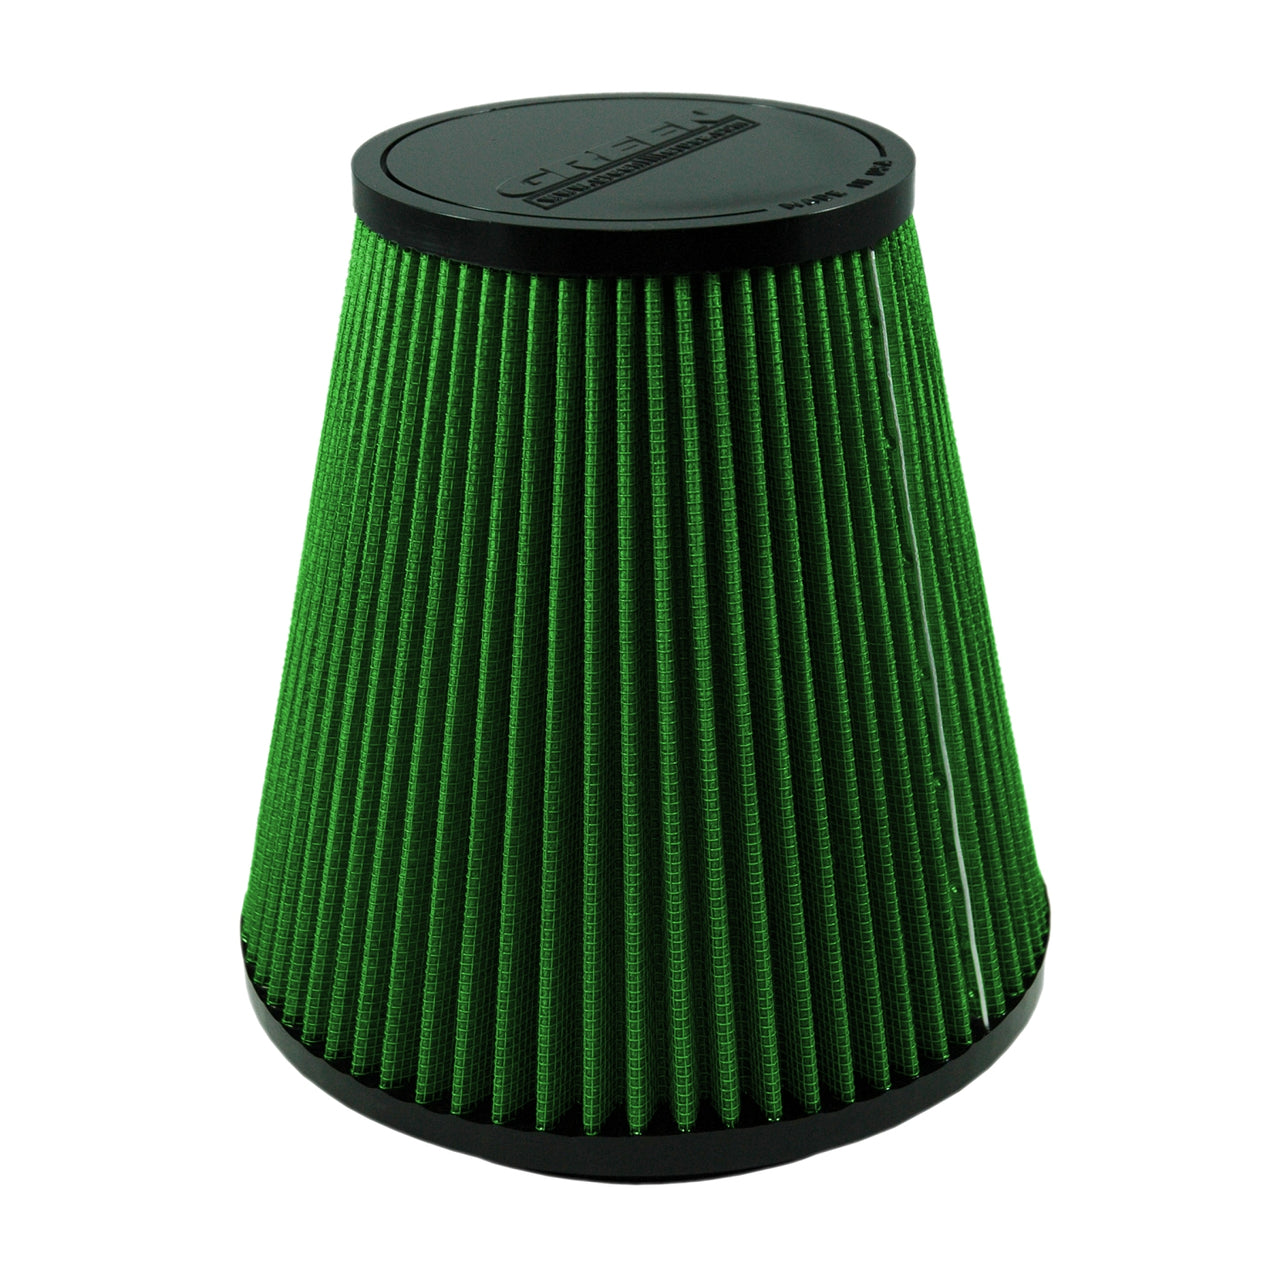 Green Filter Cone Filter - ID 5.5in. / Base 7.75in. / Top 4.75in. / H 7.75in.